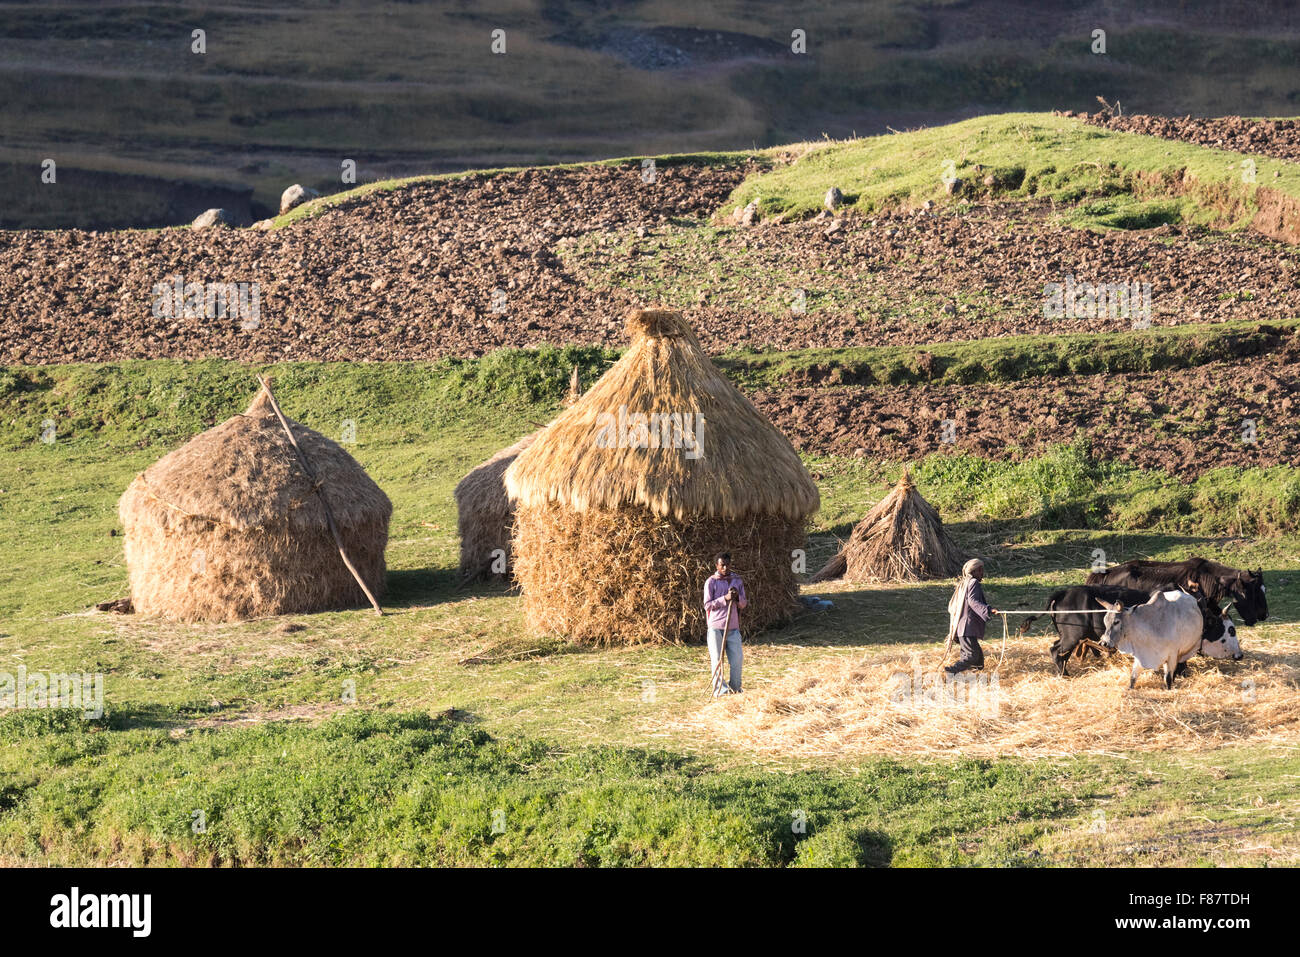 Farmers winnowing using cows in the Jemma Valley, Ethiopia Stock Photo